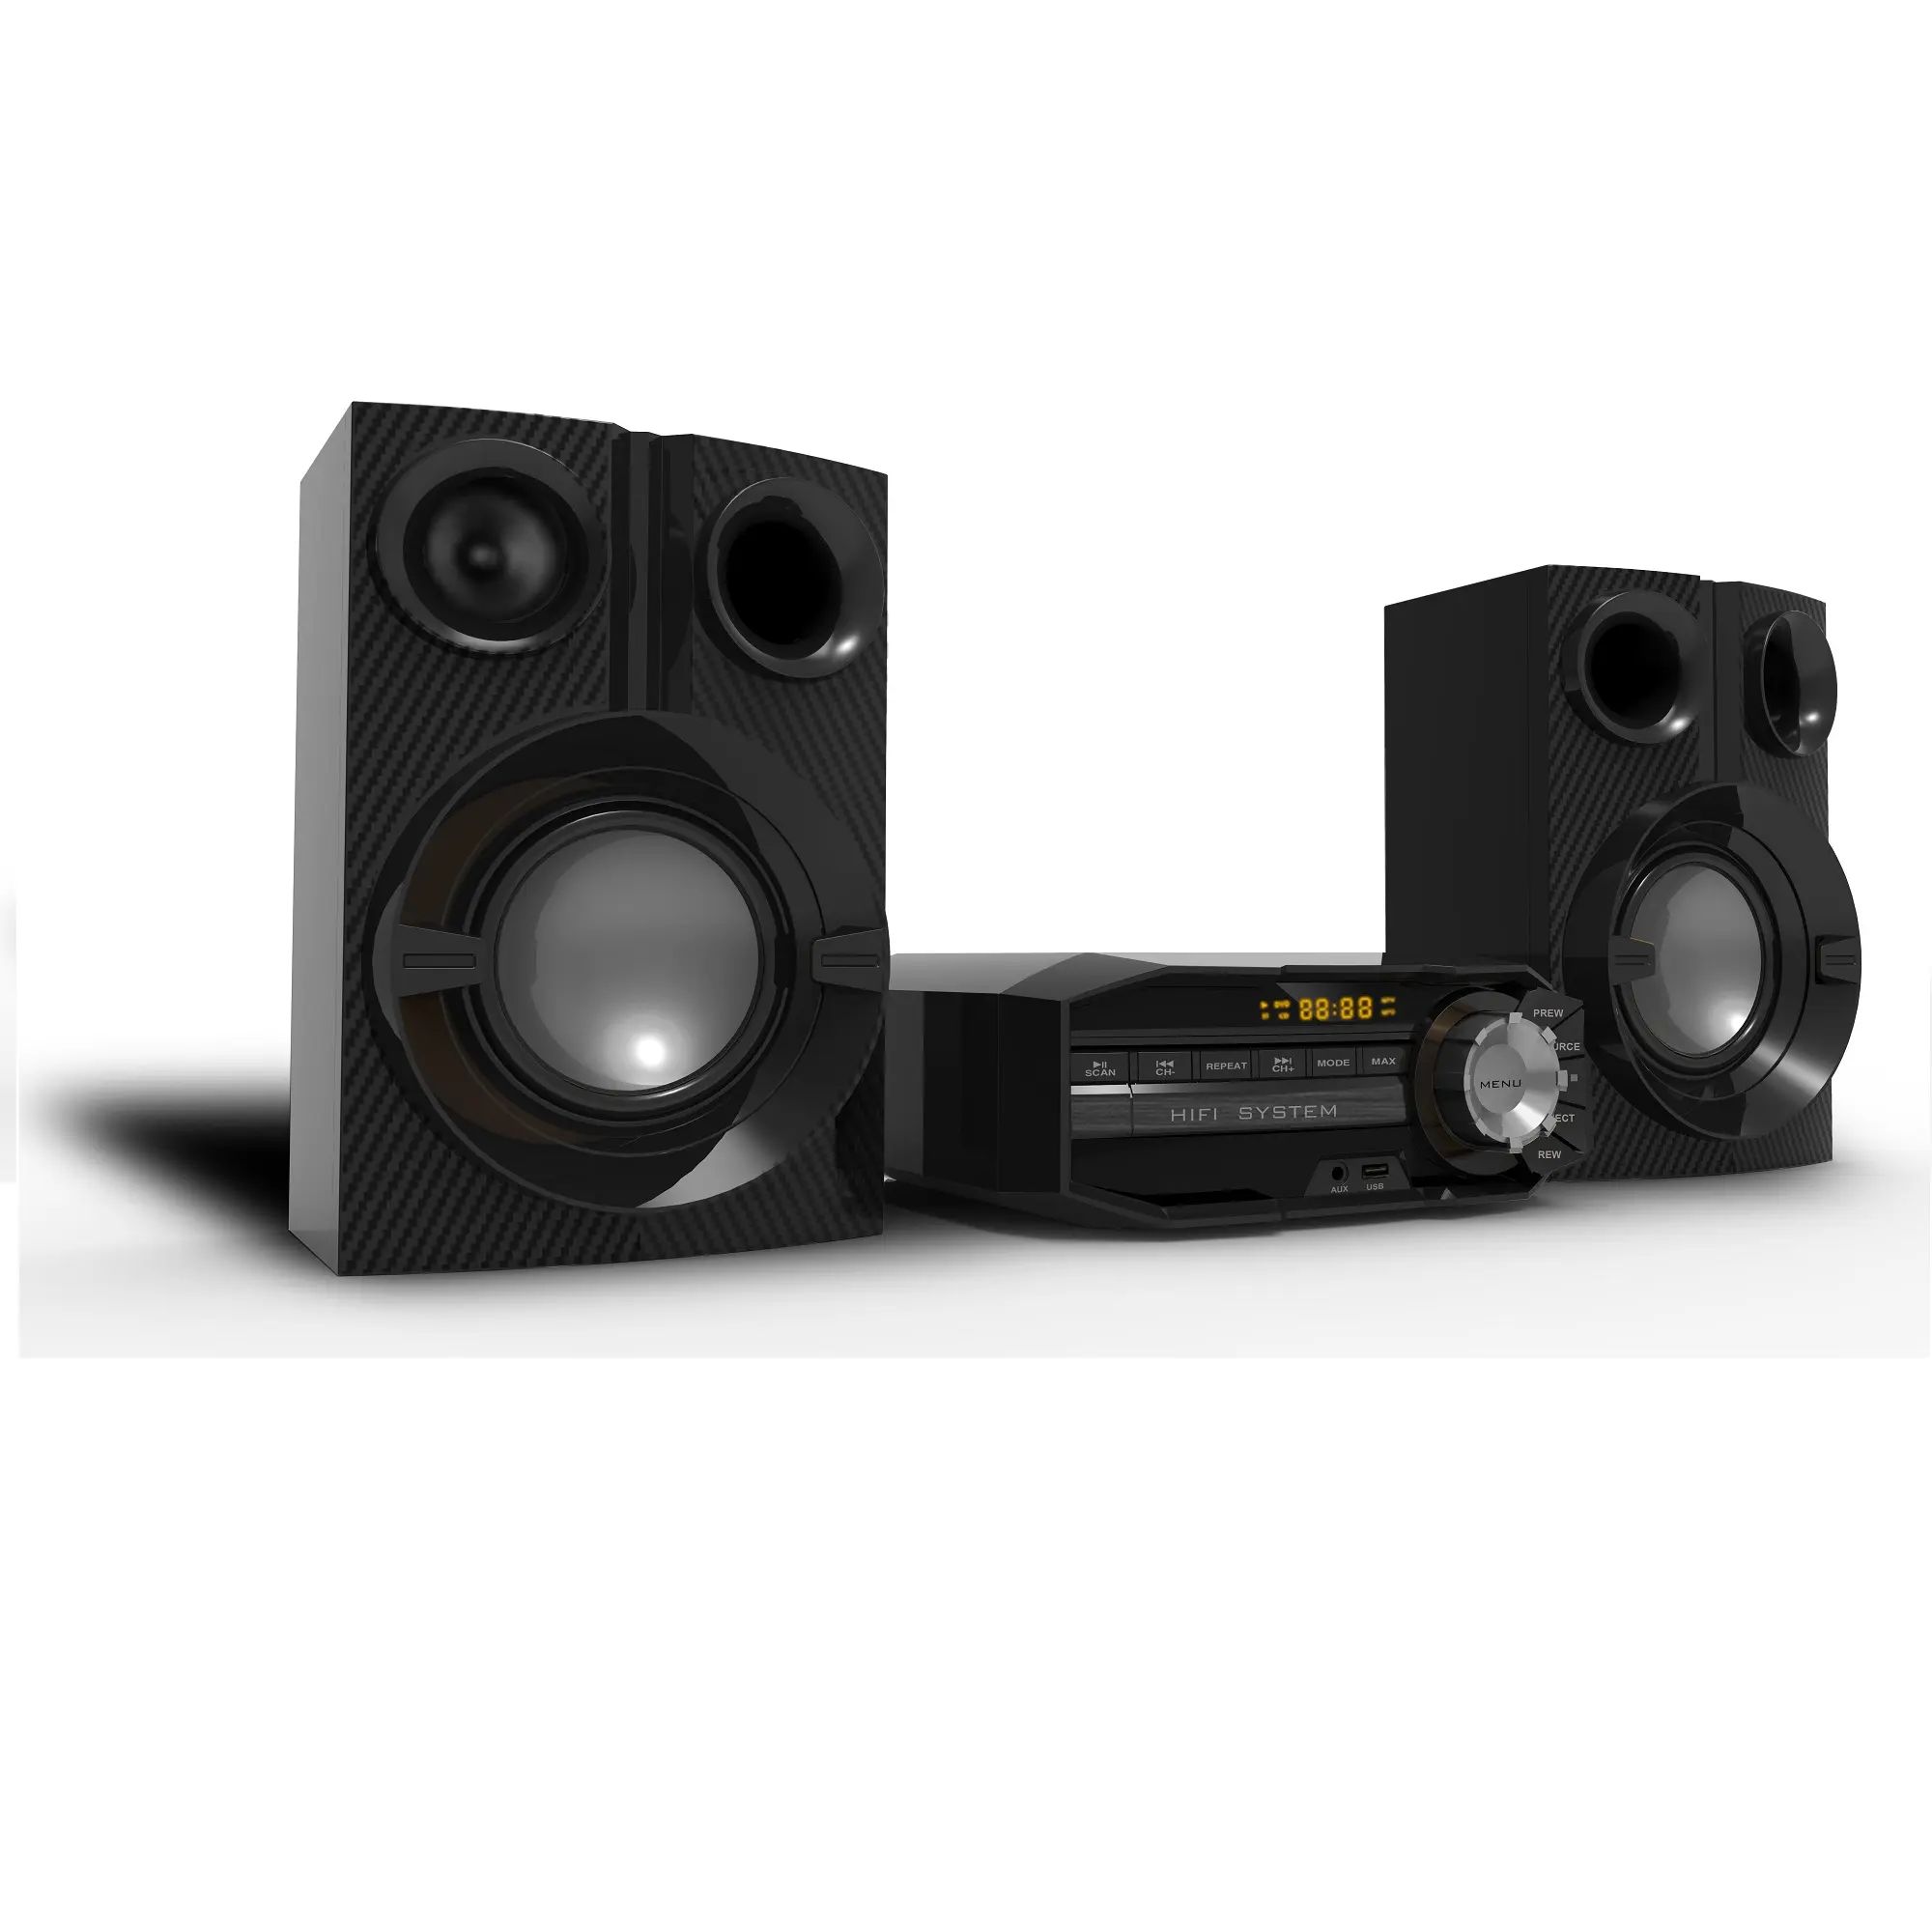 stereo sound Multimedia Surround Sound Home Theater Speaker system